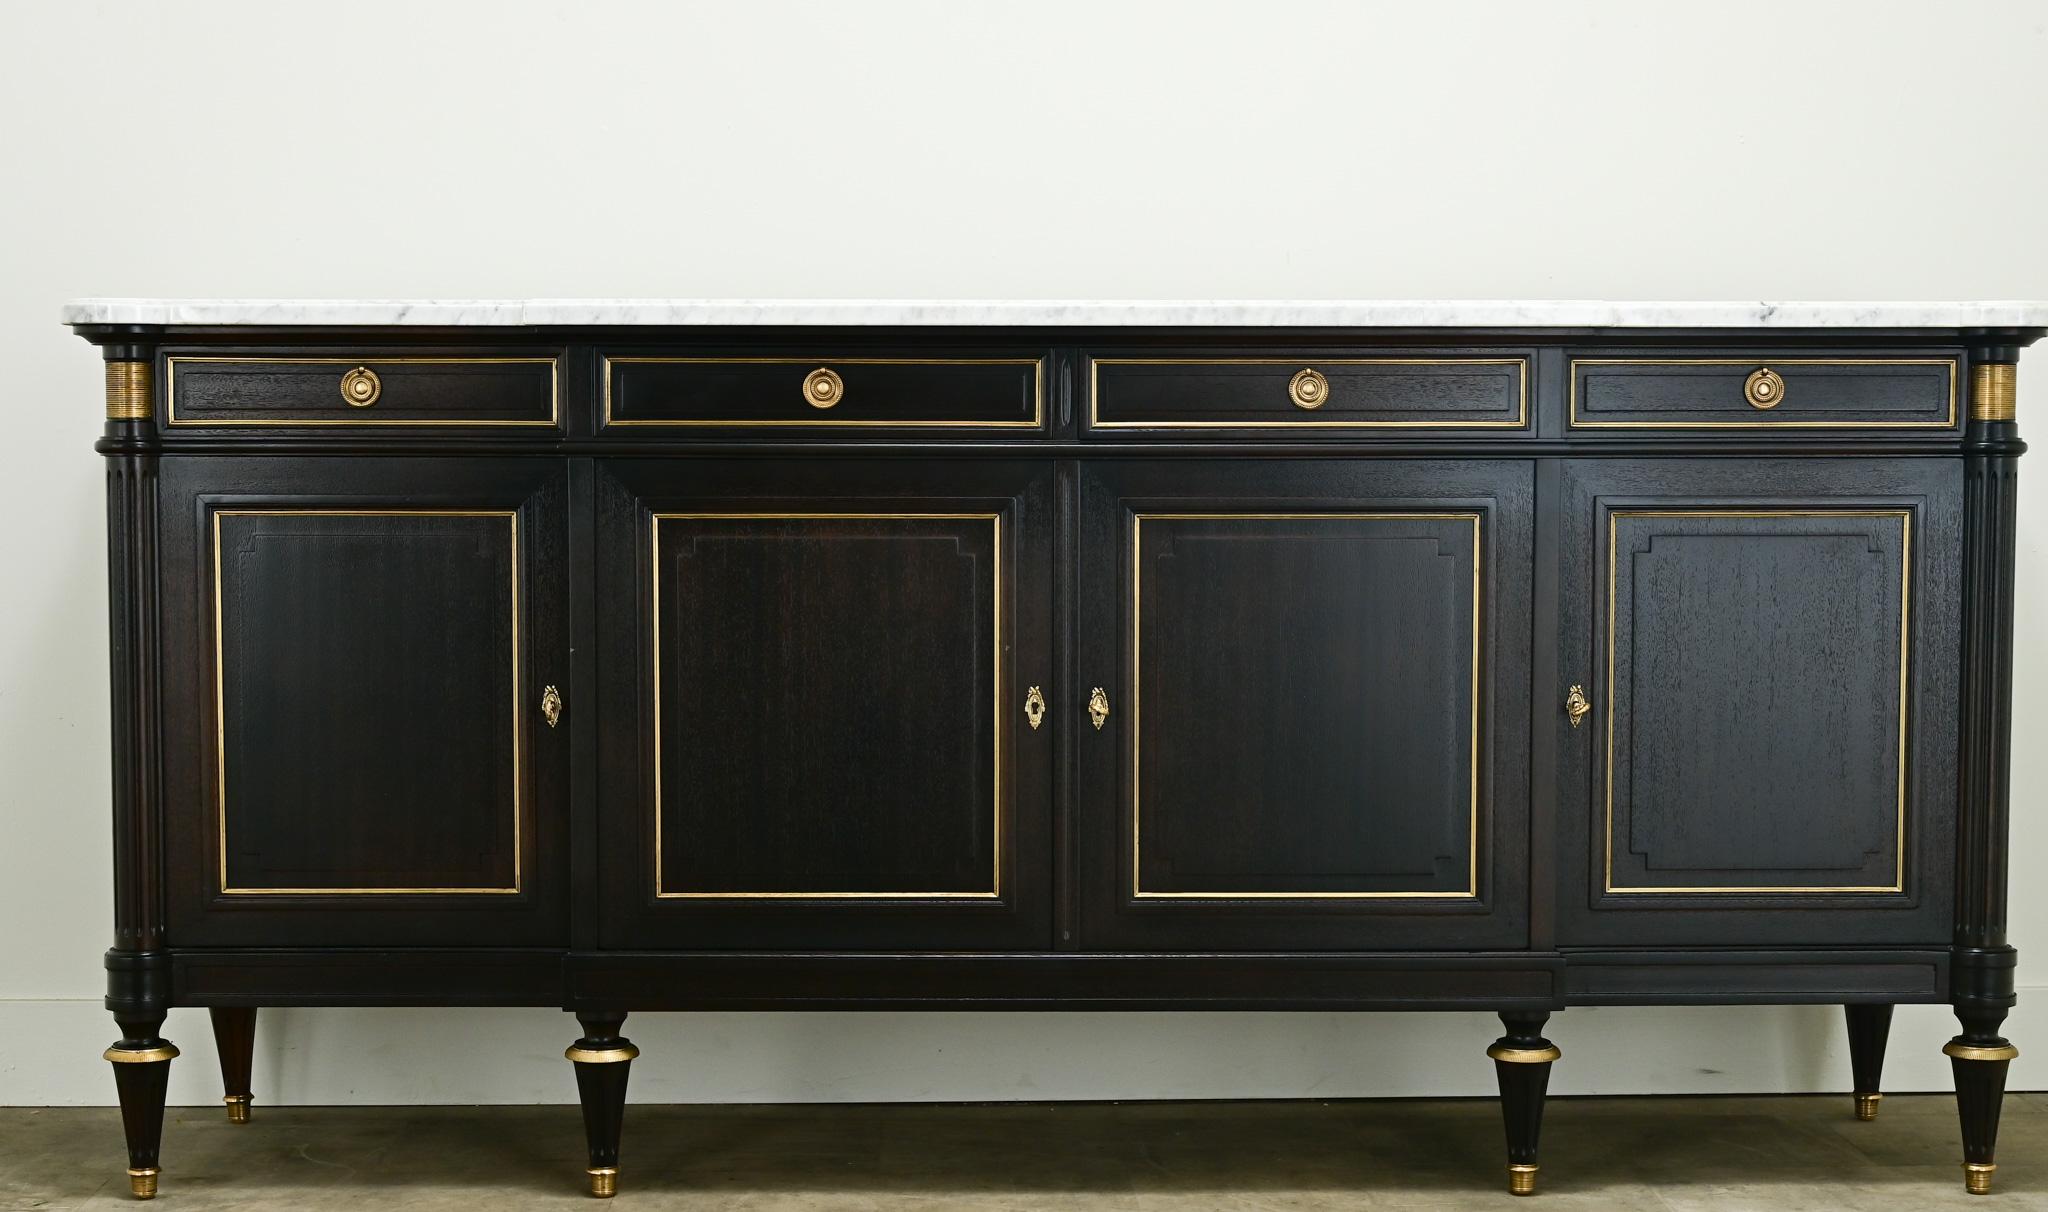 A large ebonized mahogany breakfront enfilade in the classic Louis XVI style. The original marble top is shaped to fit its base with beveled edges. There are four drawers trimmed with brass and brass ring pulls. Four paneled door fronts are also